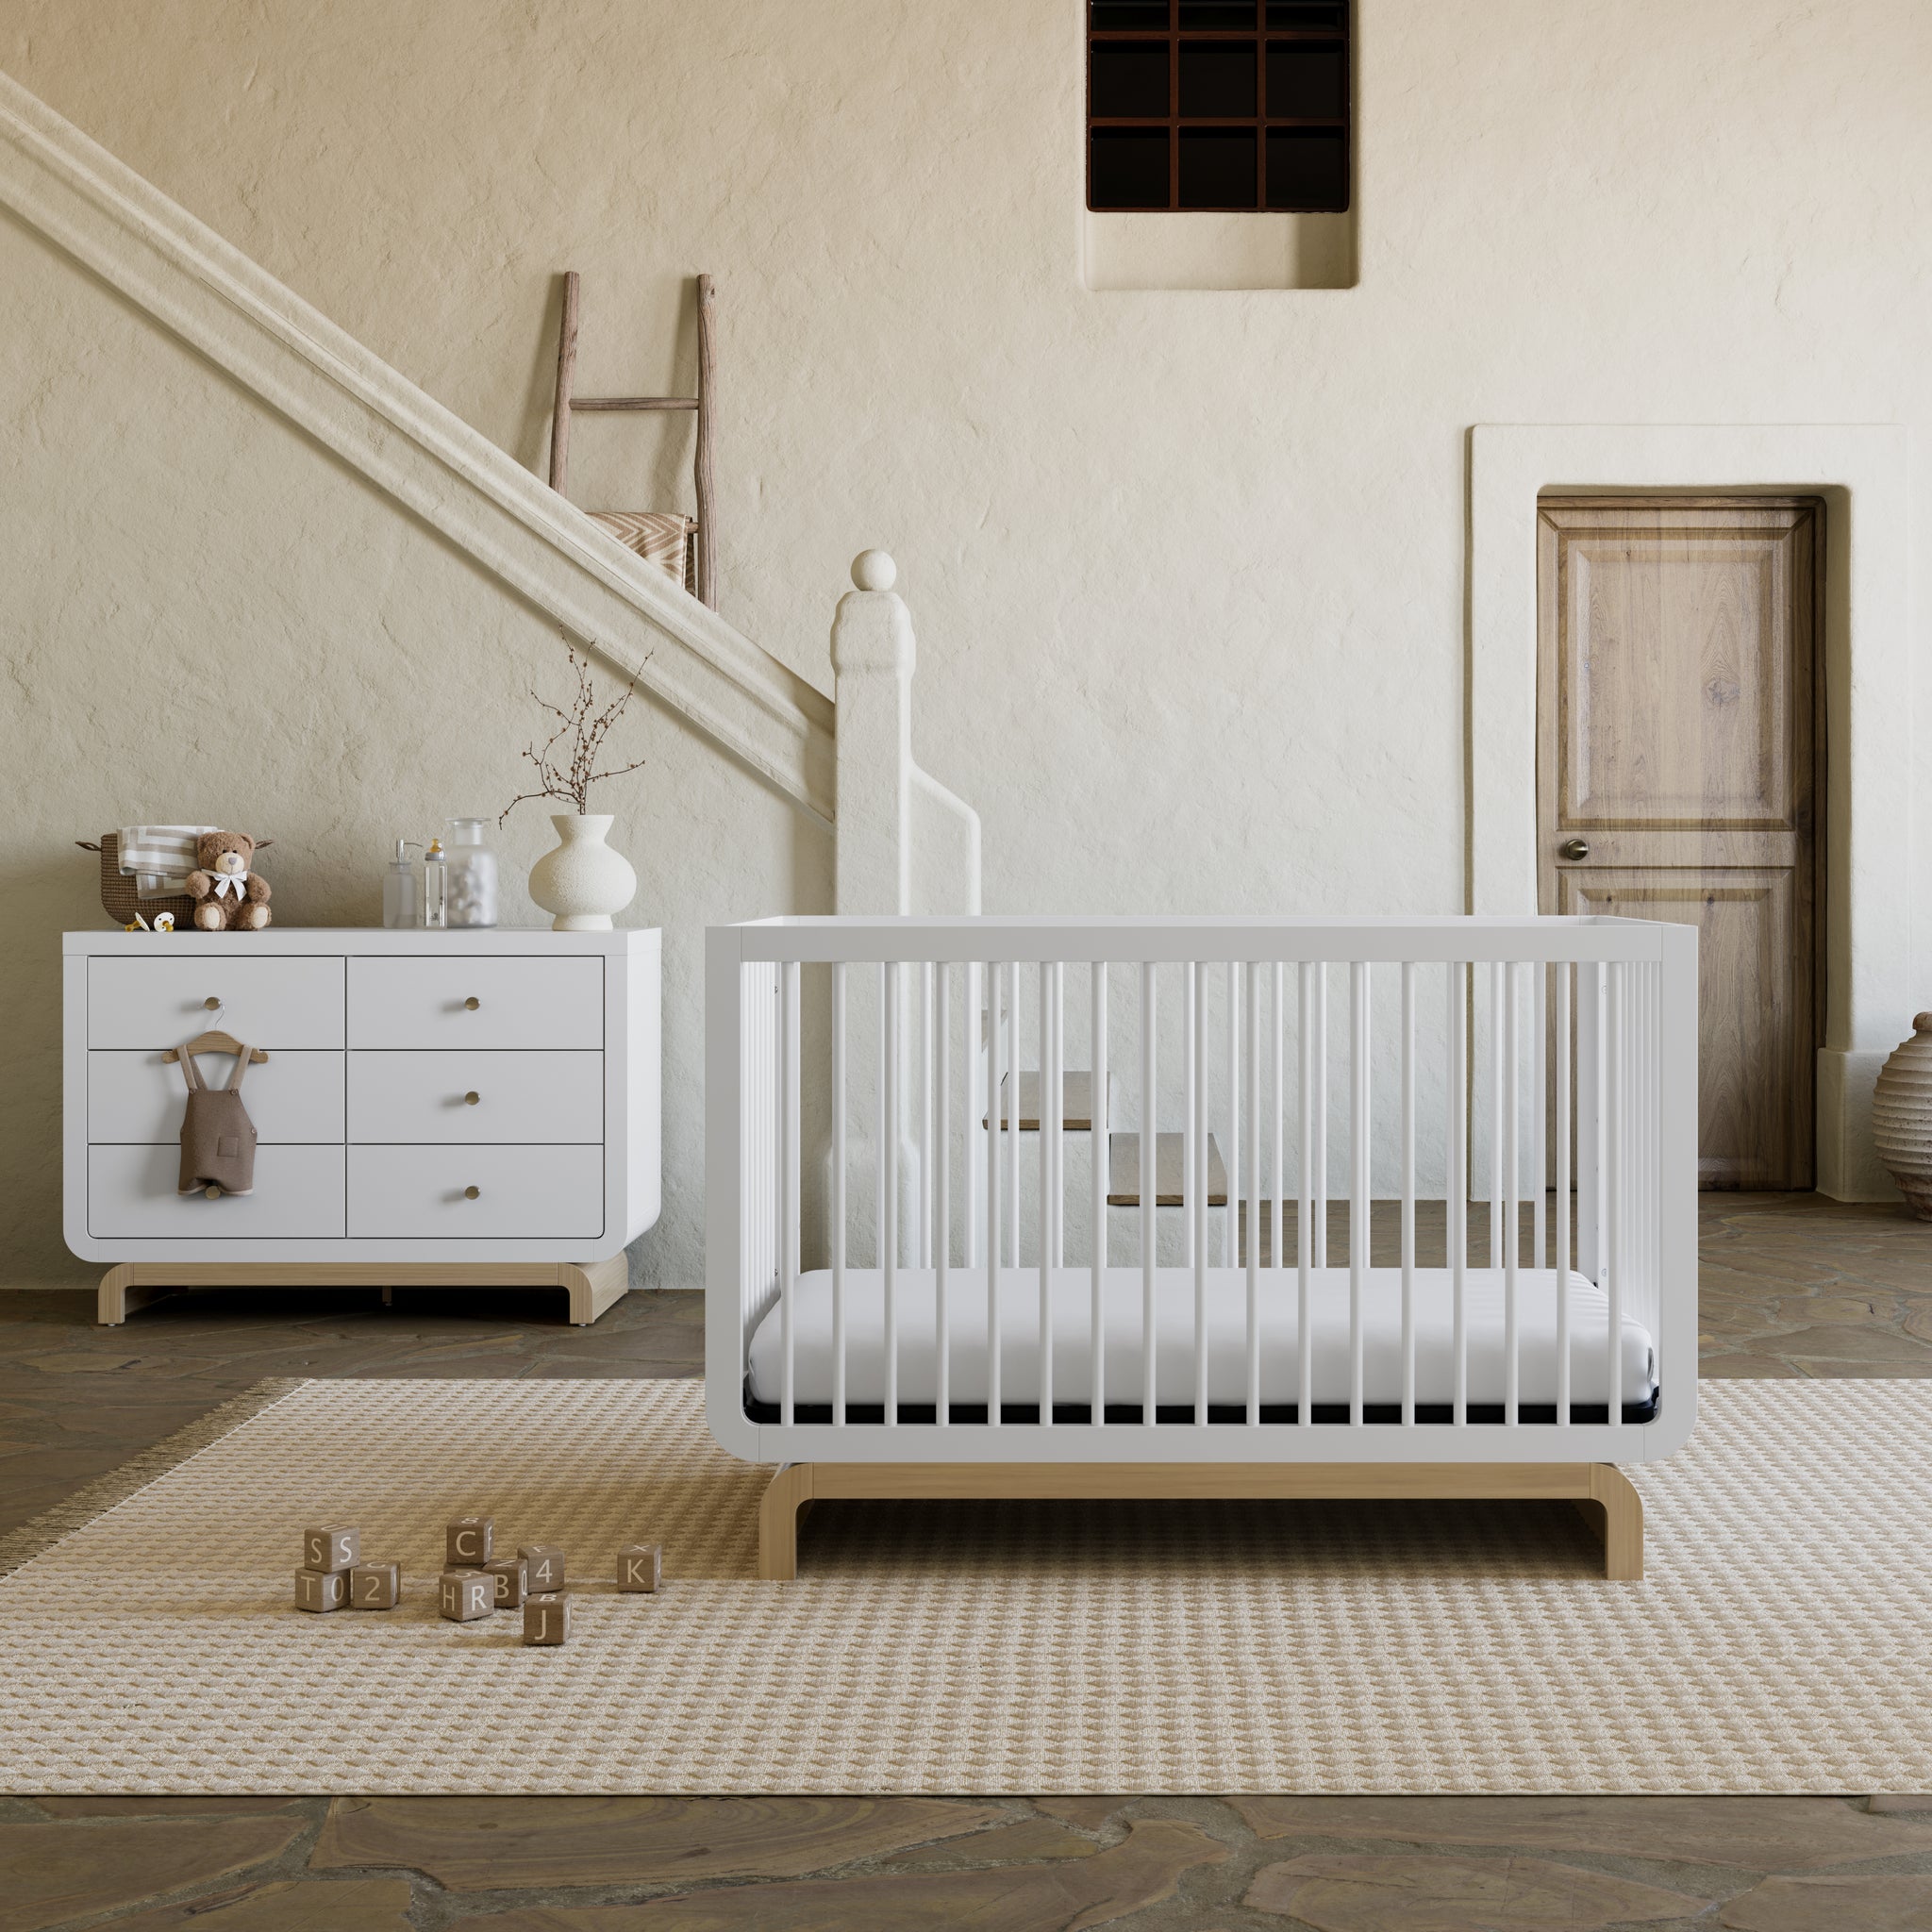 Two-tone white and natural wood baby crib and six drawer dresser collection in a rustic room setting